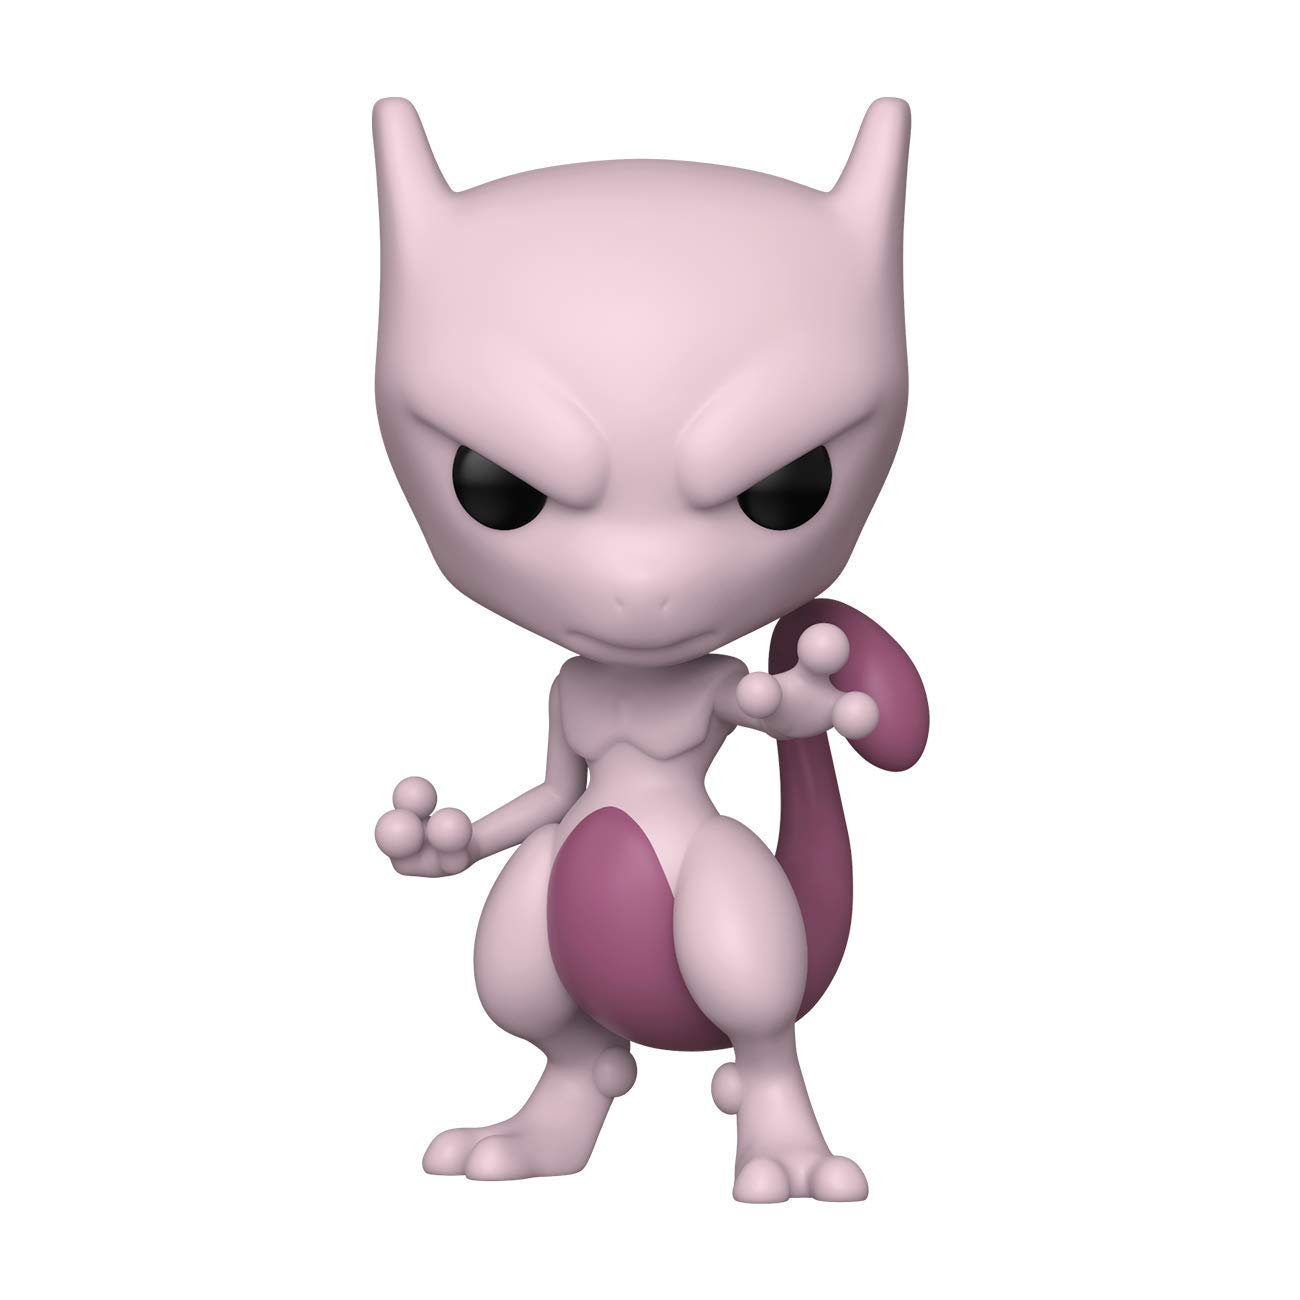 Pokemon Funko Pop Figures Include Mewtwo Pichu And More 9to5toys